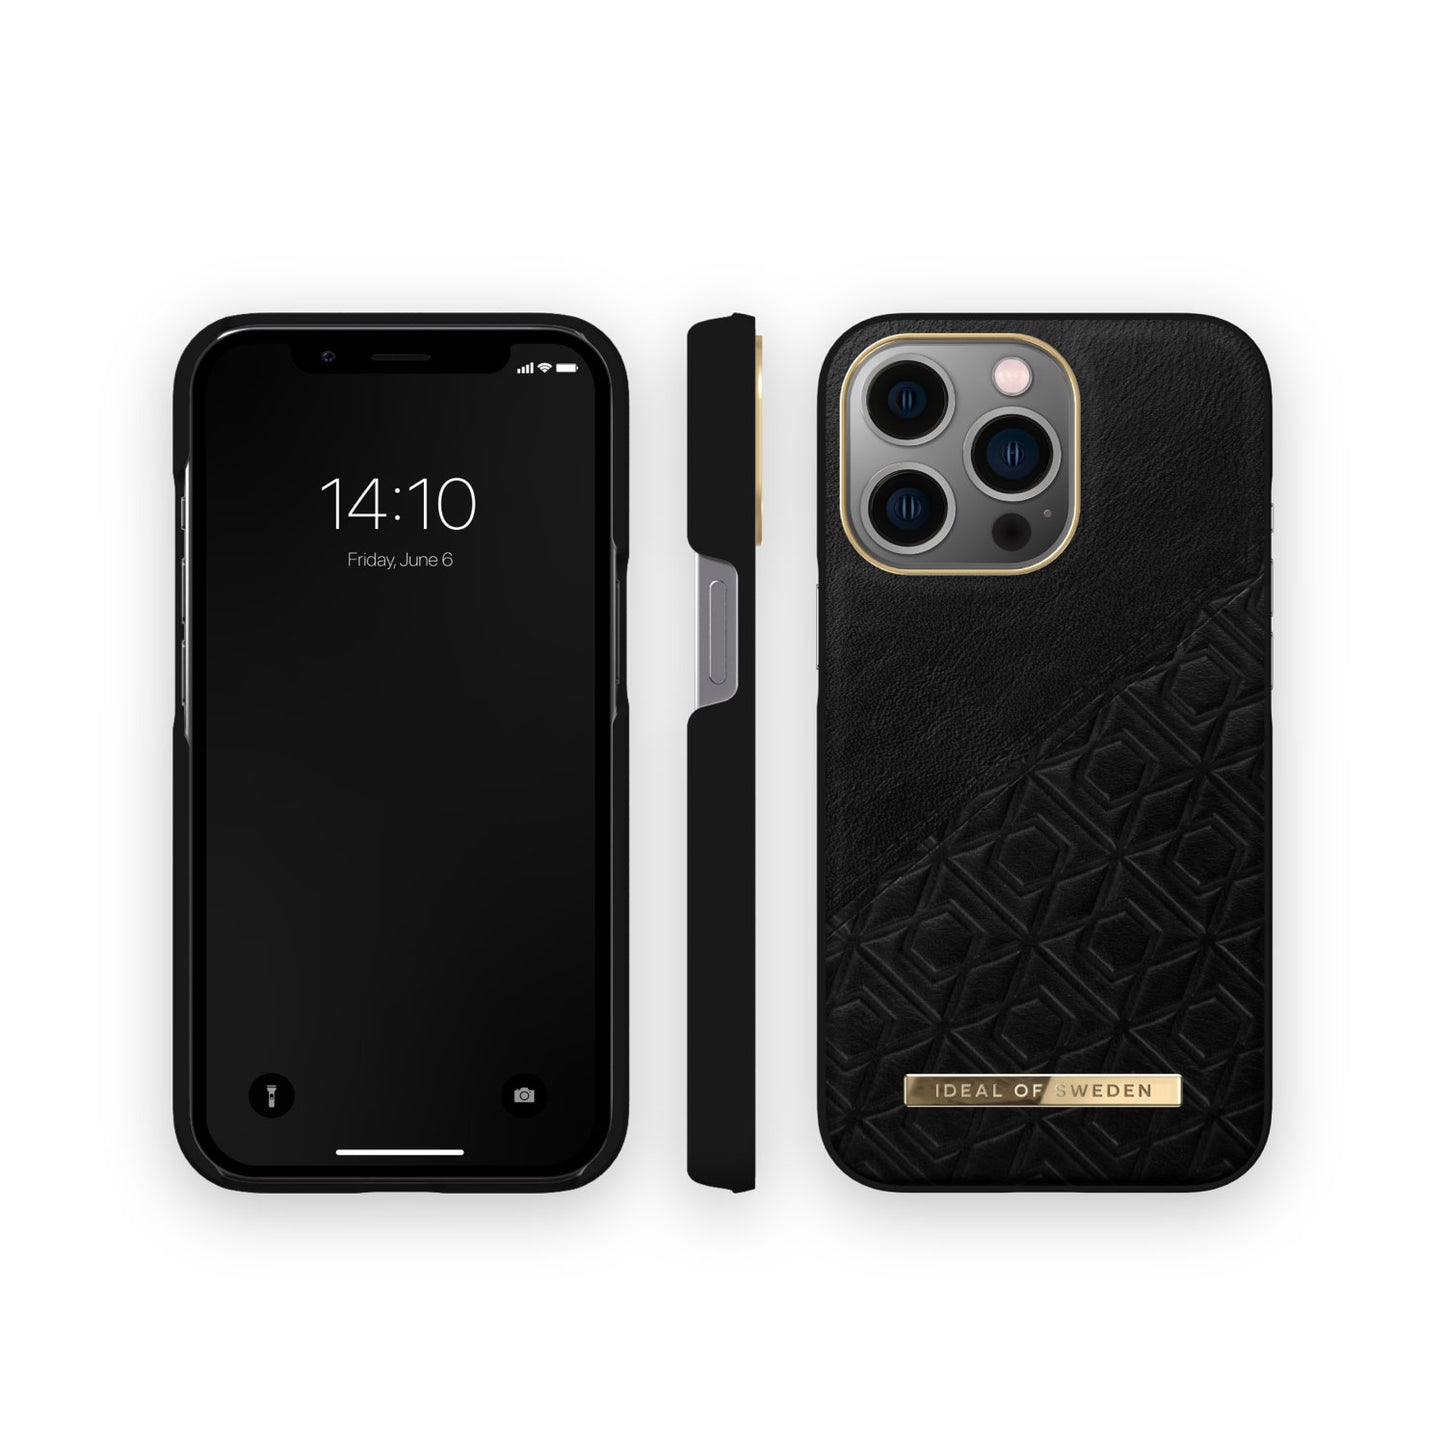 Ideal Of Sweden Atelier Mid Case for iPhone 13 Pro - Embossed Black